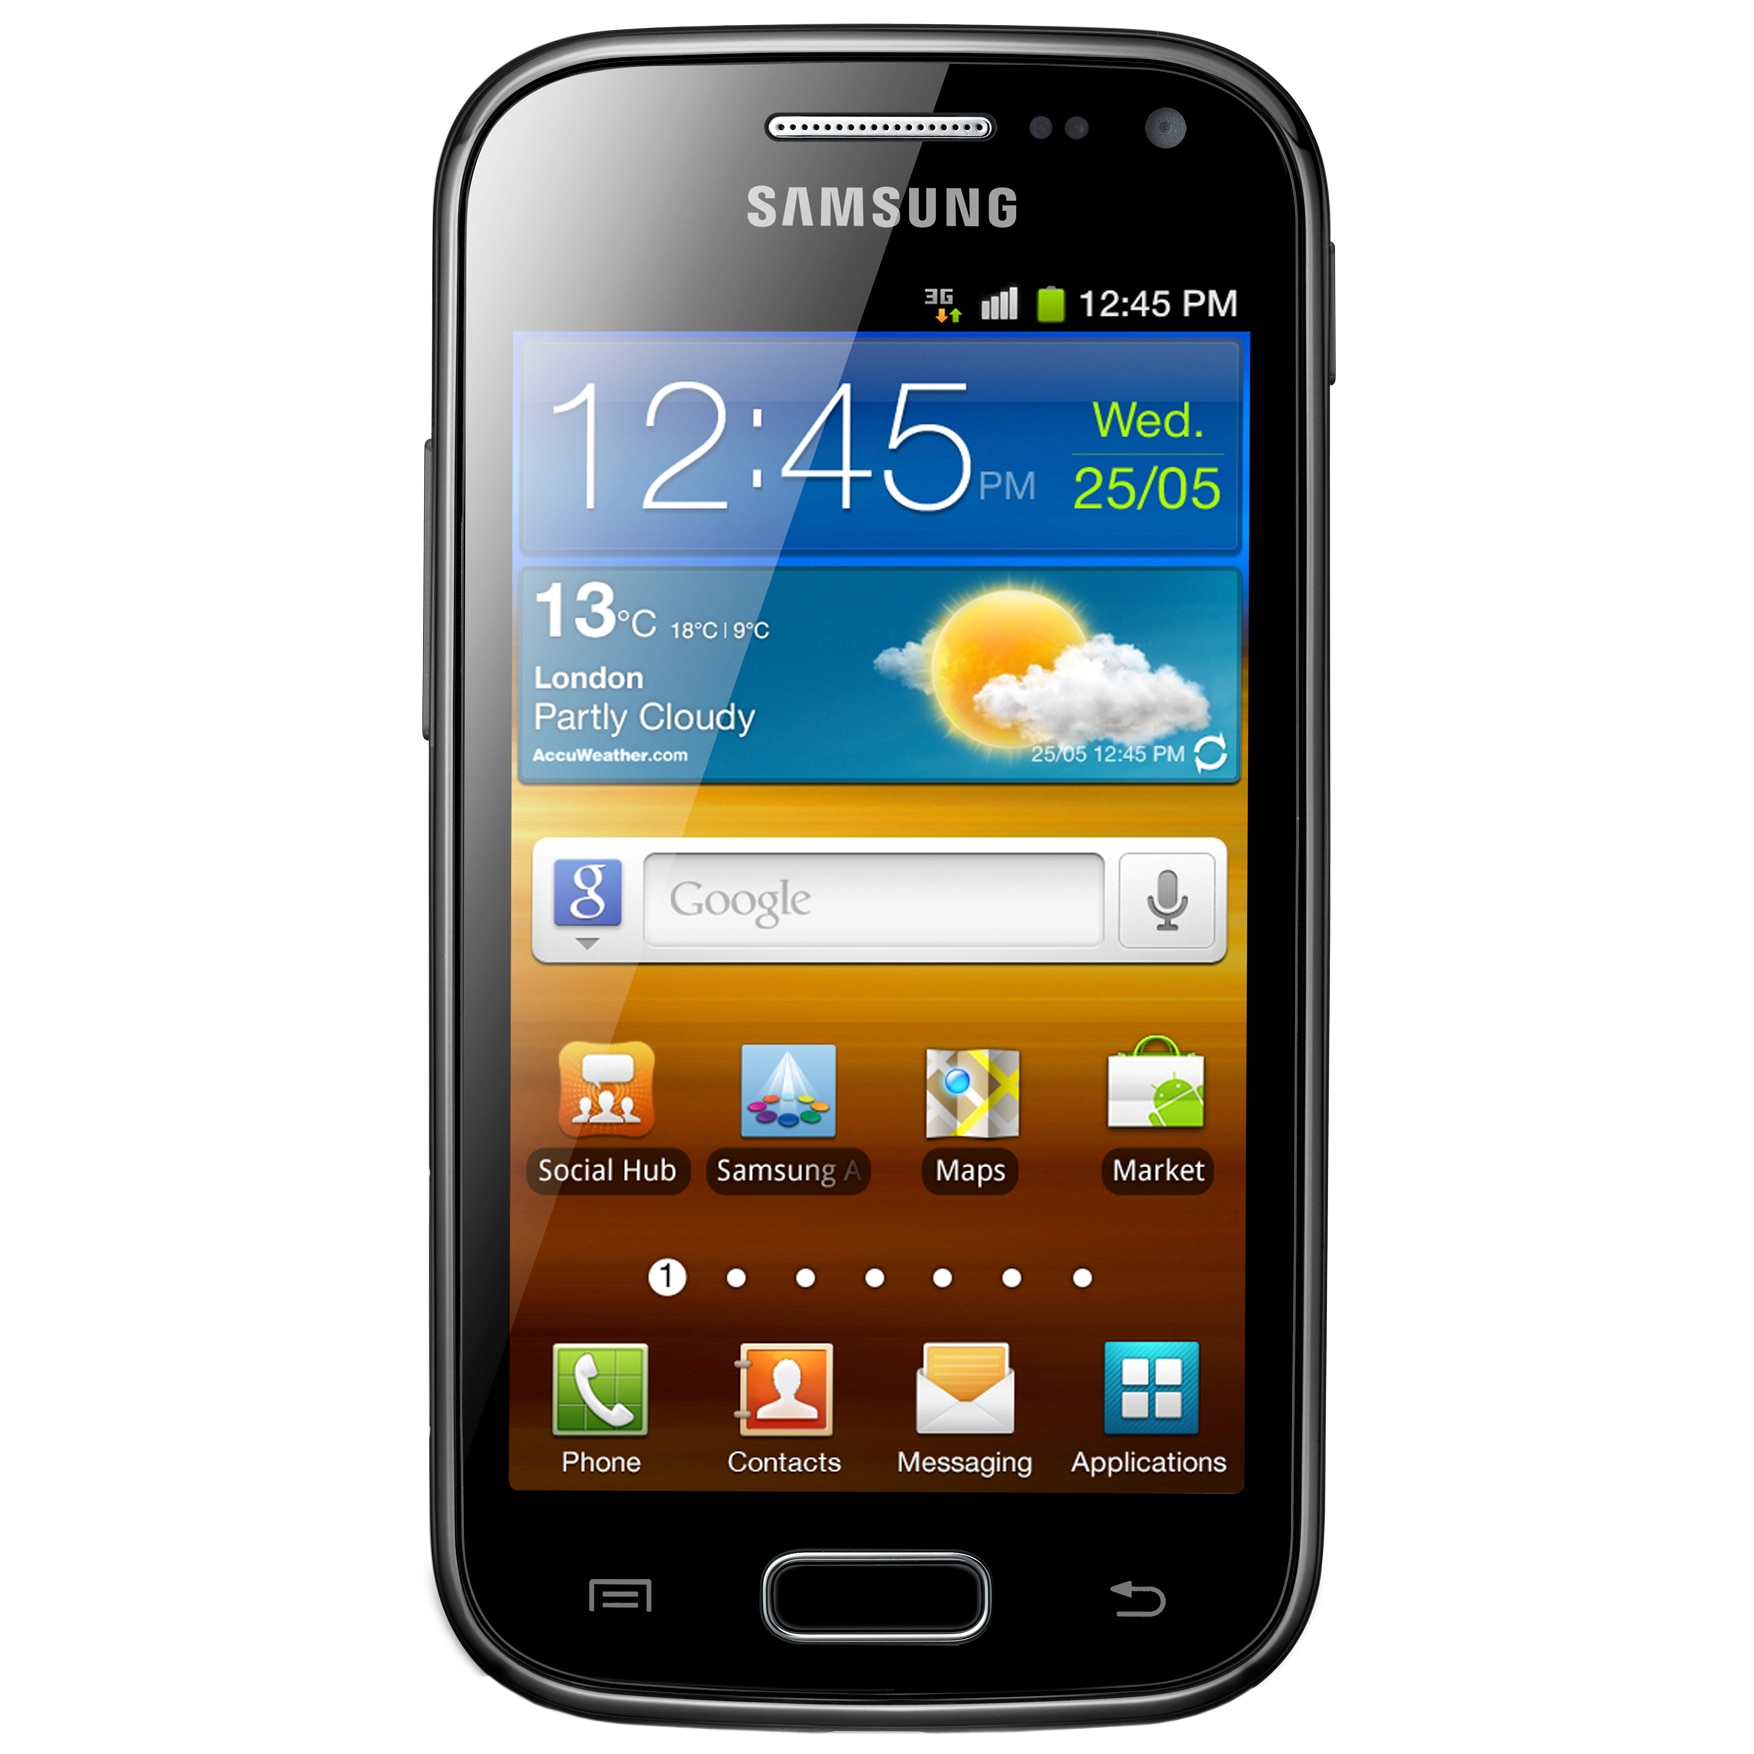 Samsung Galaxy Ace 2 I8160, 3,8 Zoll-Smartphone mit Android 2.3 ...